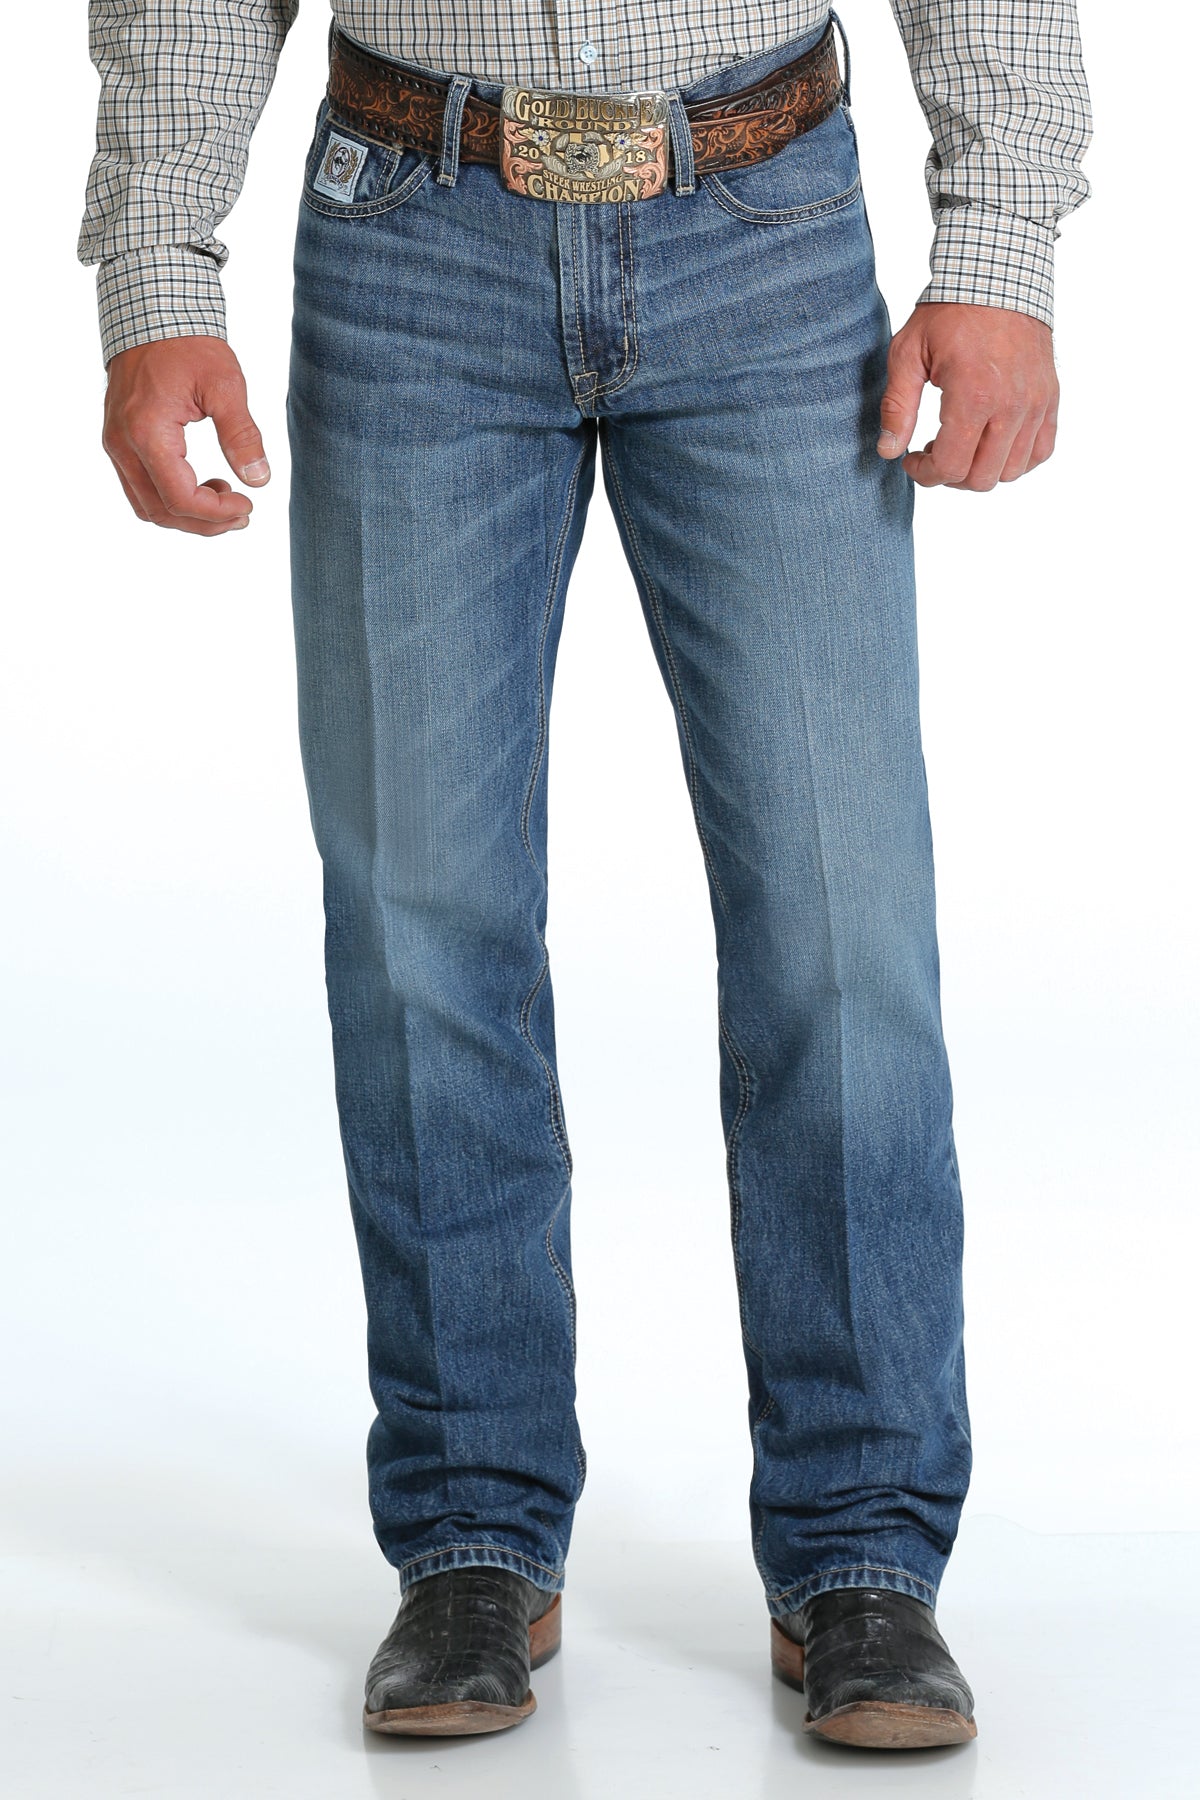 CINCH Men's Relaxed Fit White Label- Medium Wash